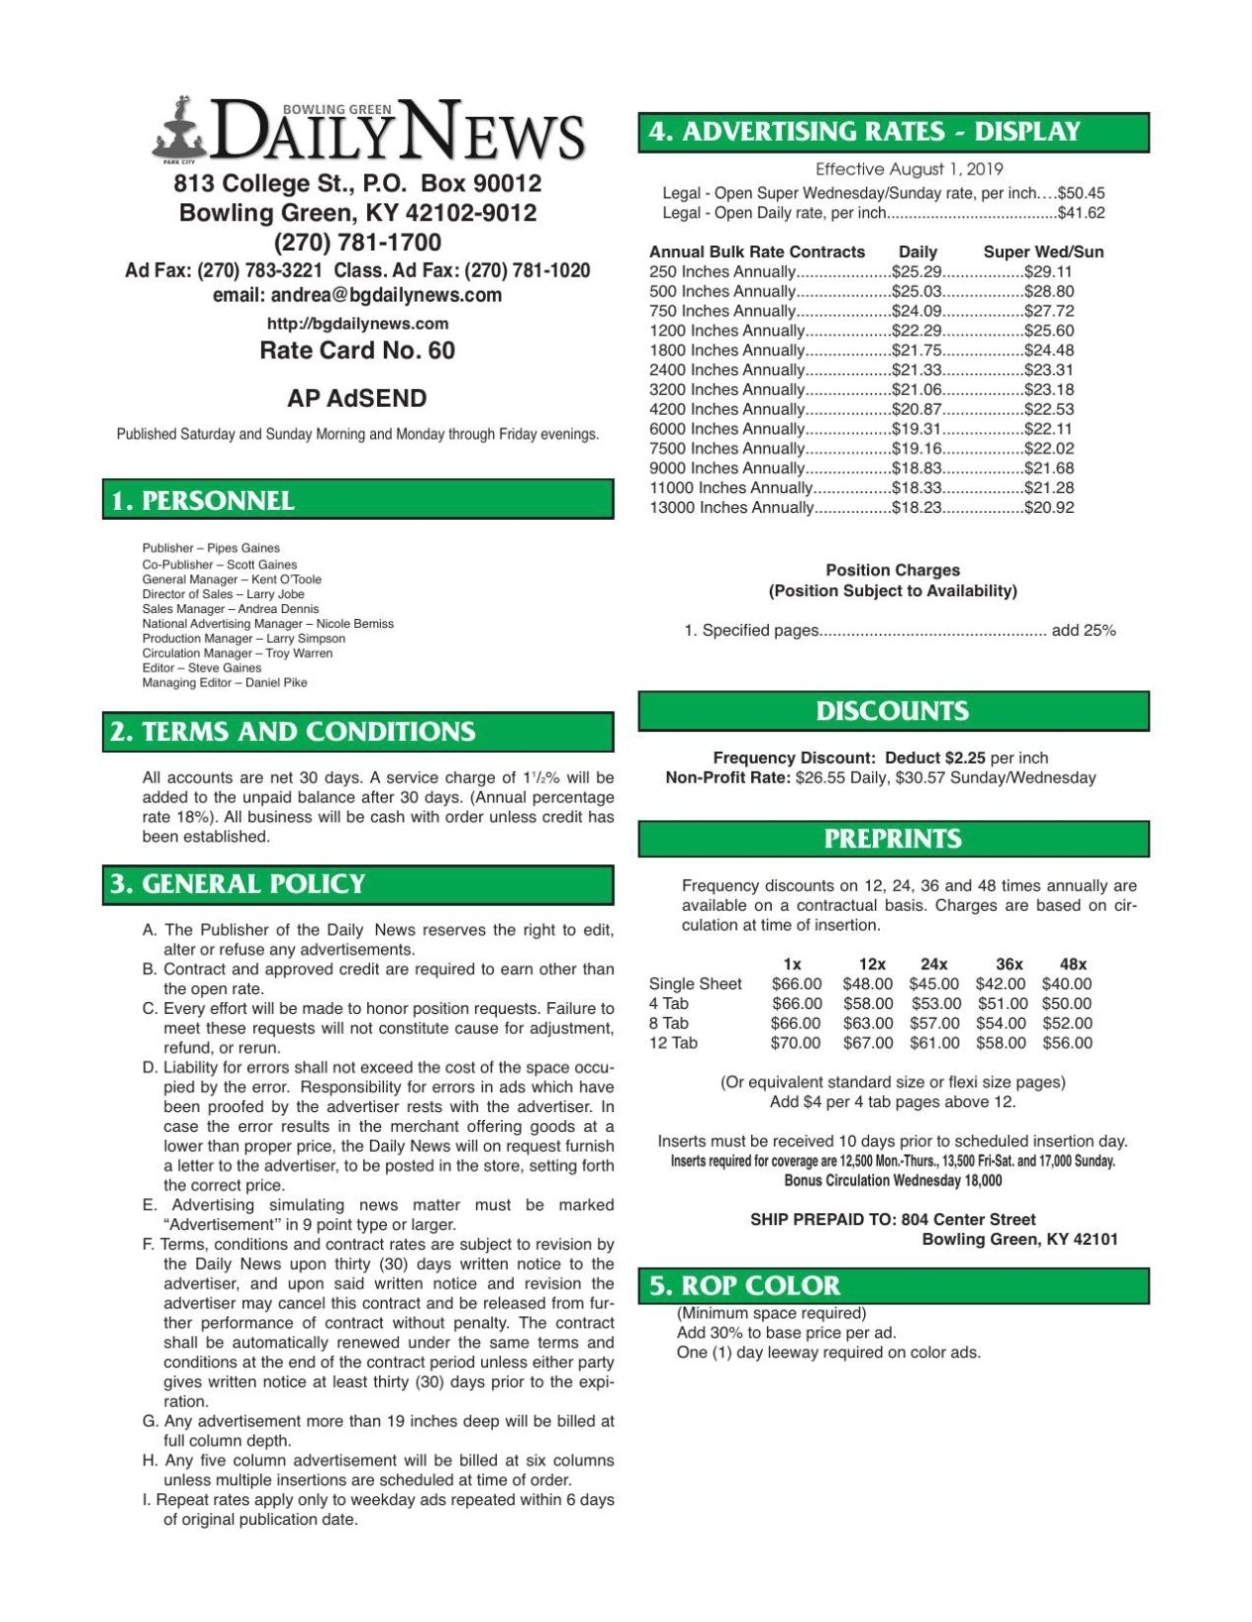 Dn Local Print Rate Card | Ads | Bgdailynews Throughout Advertising Rate Card Template